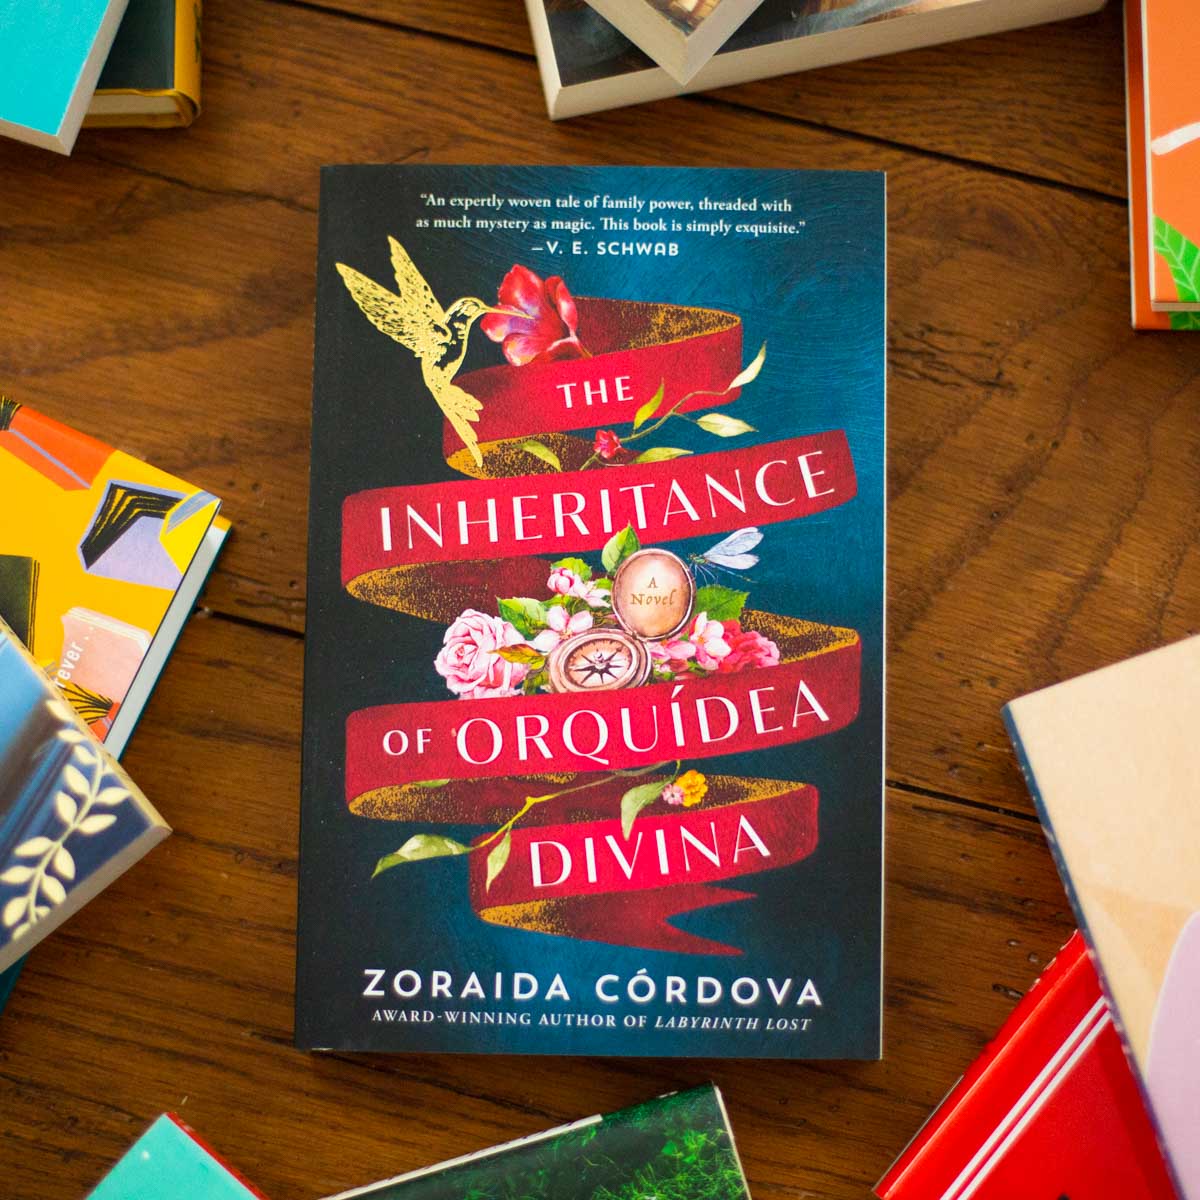 A copy of the book The Inheritance of Orquídea Divina by Zoraida Córdova sits on the table.